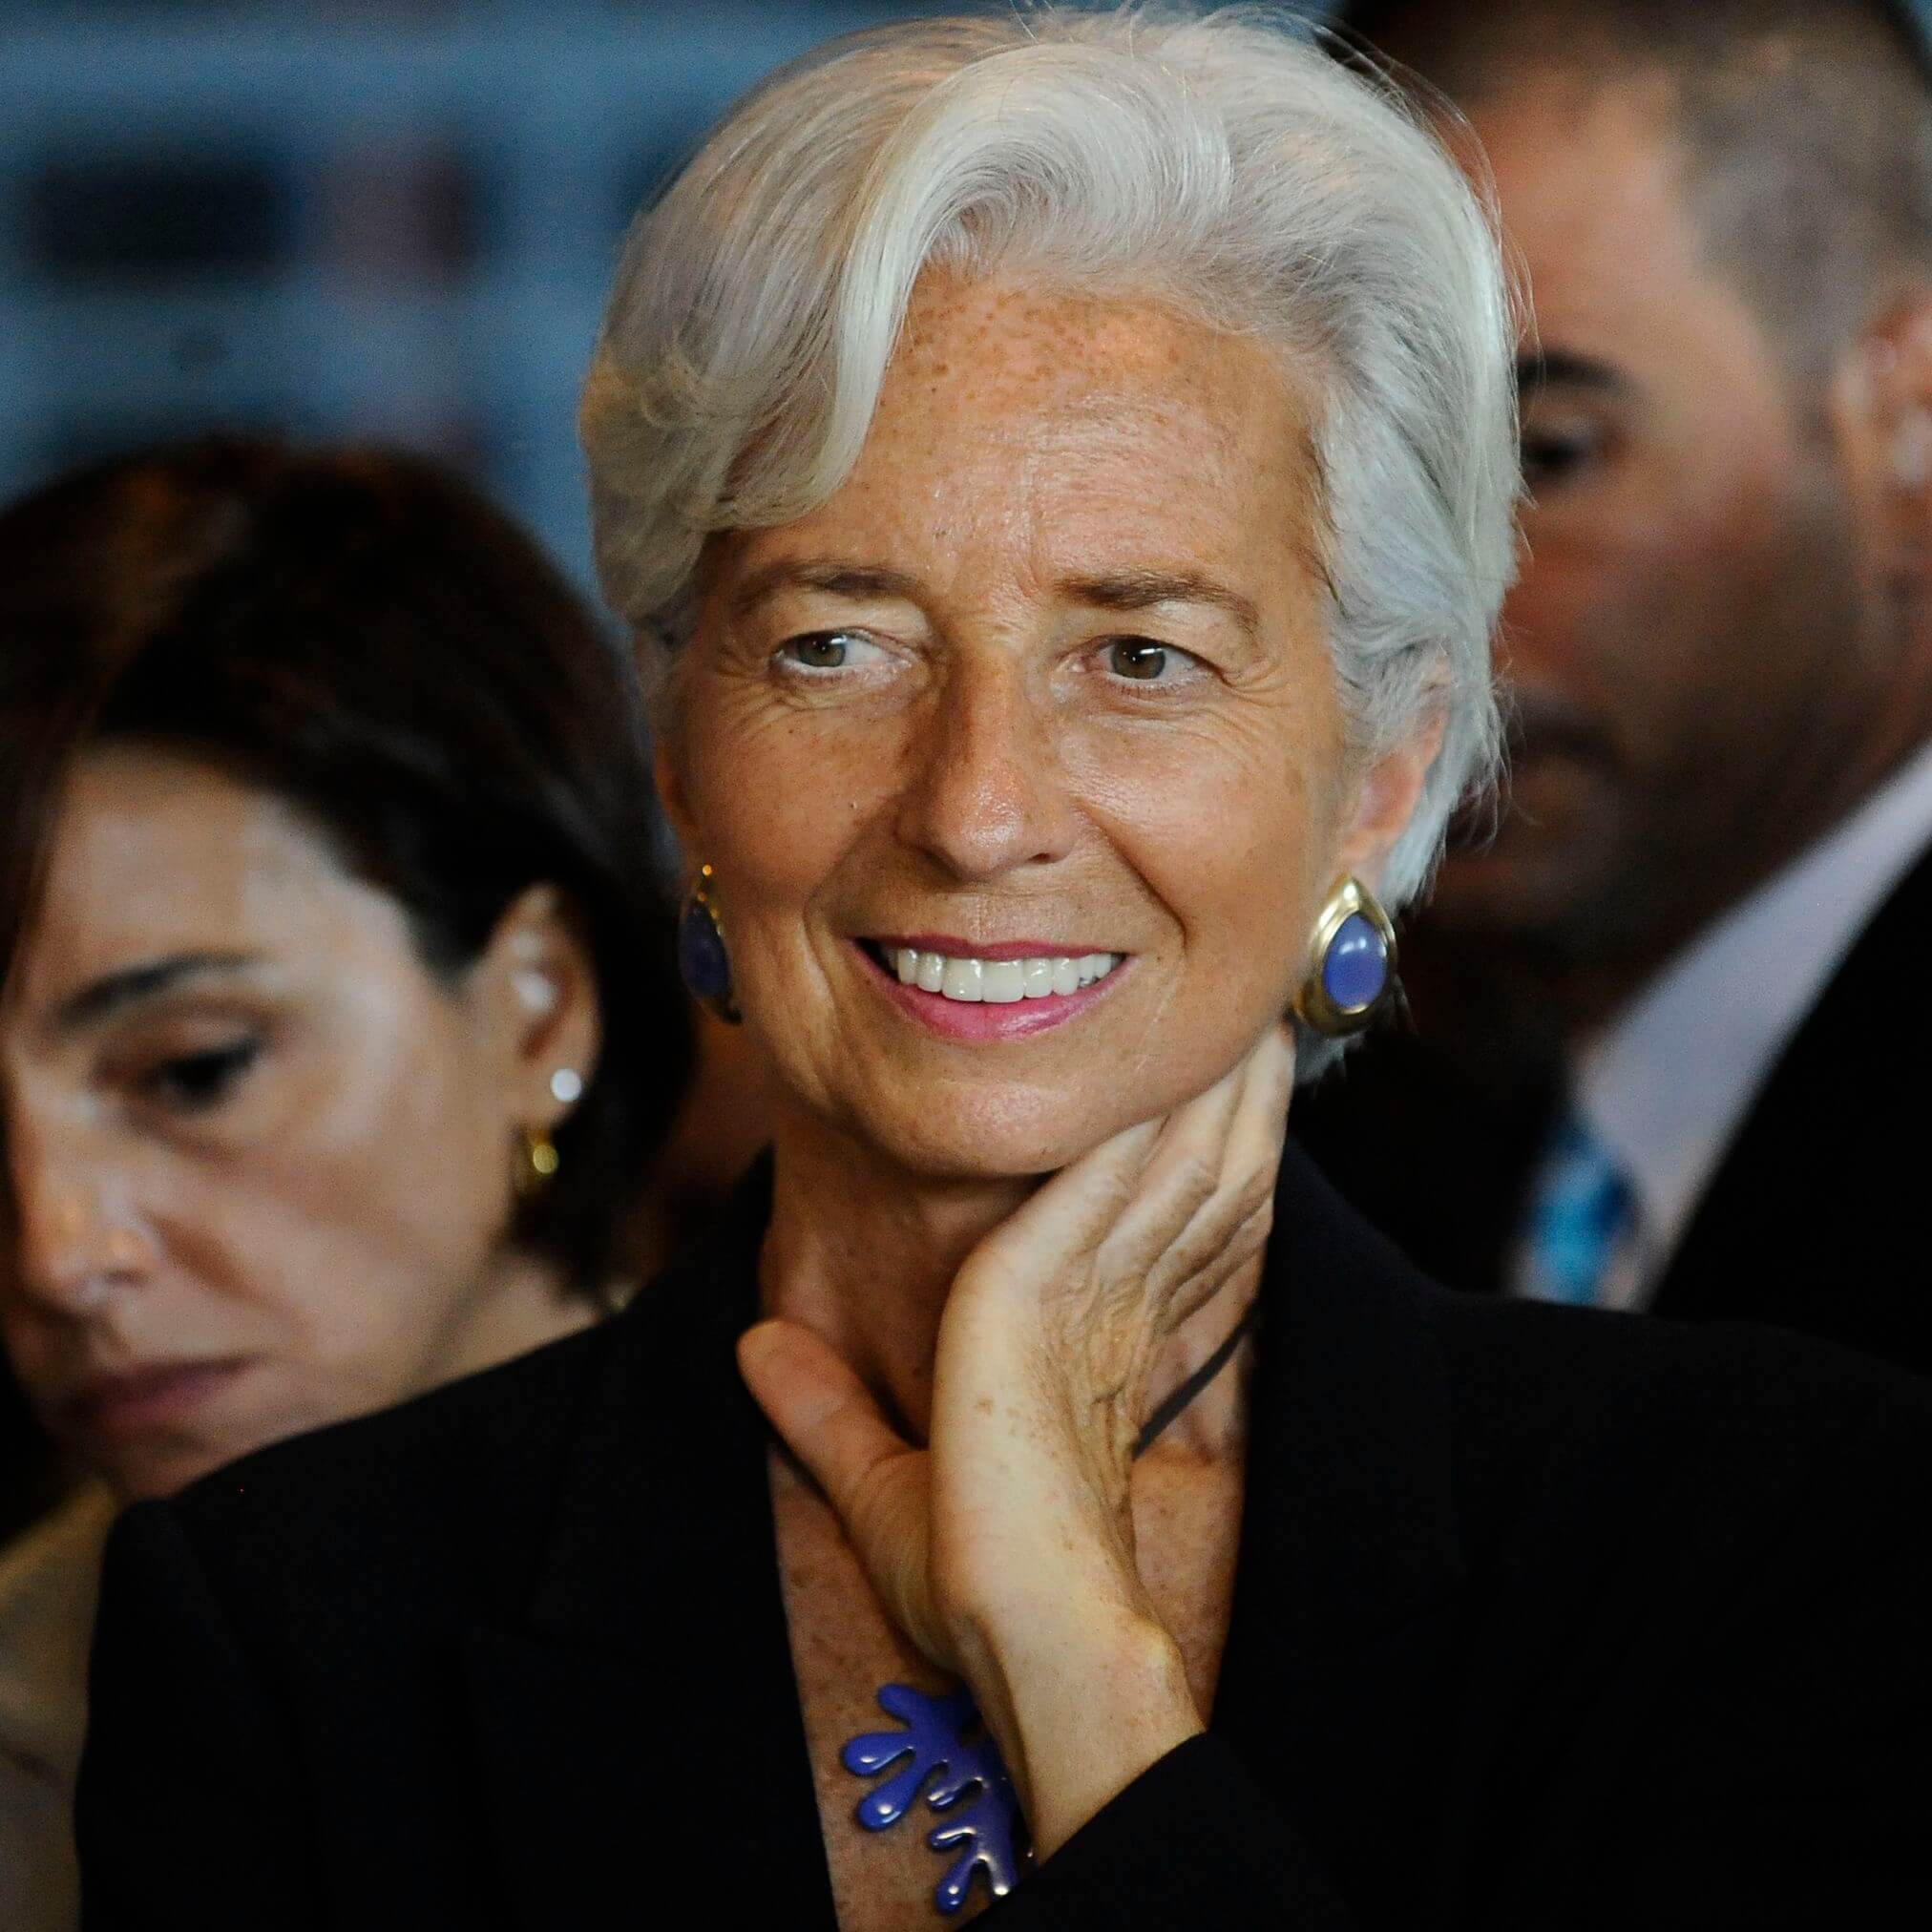 Lagarde has called for cryptocurrency regulation